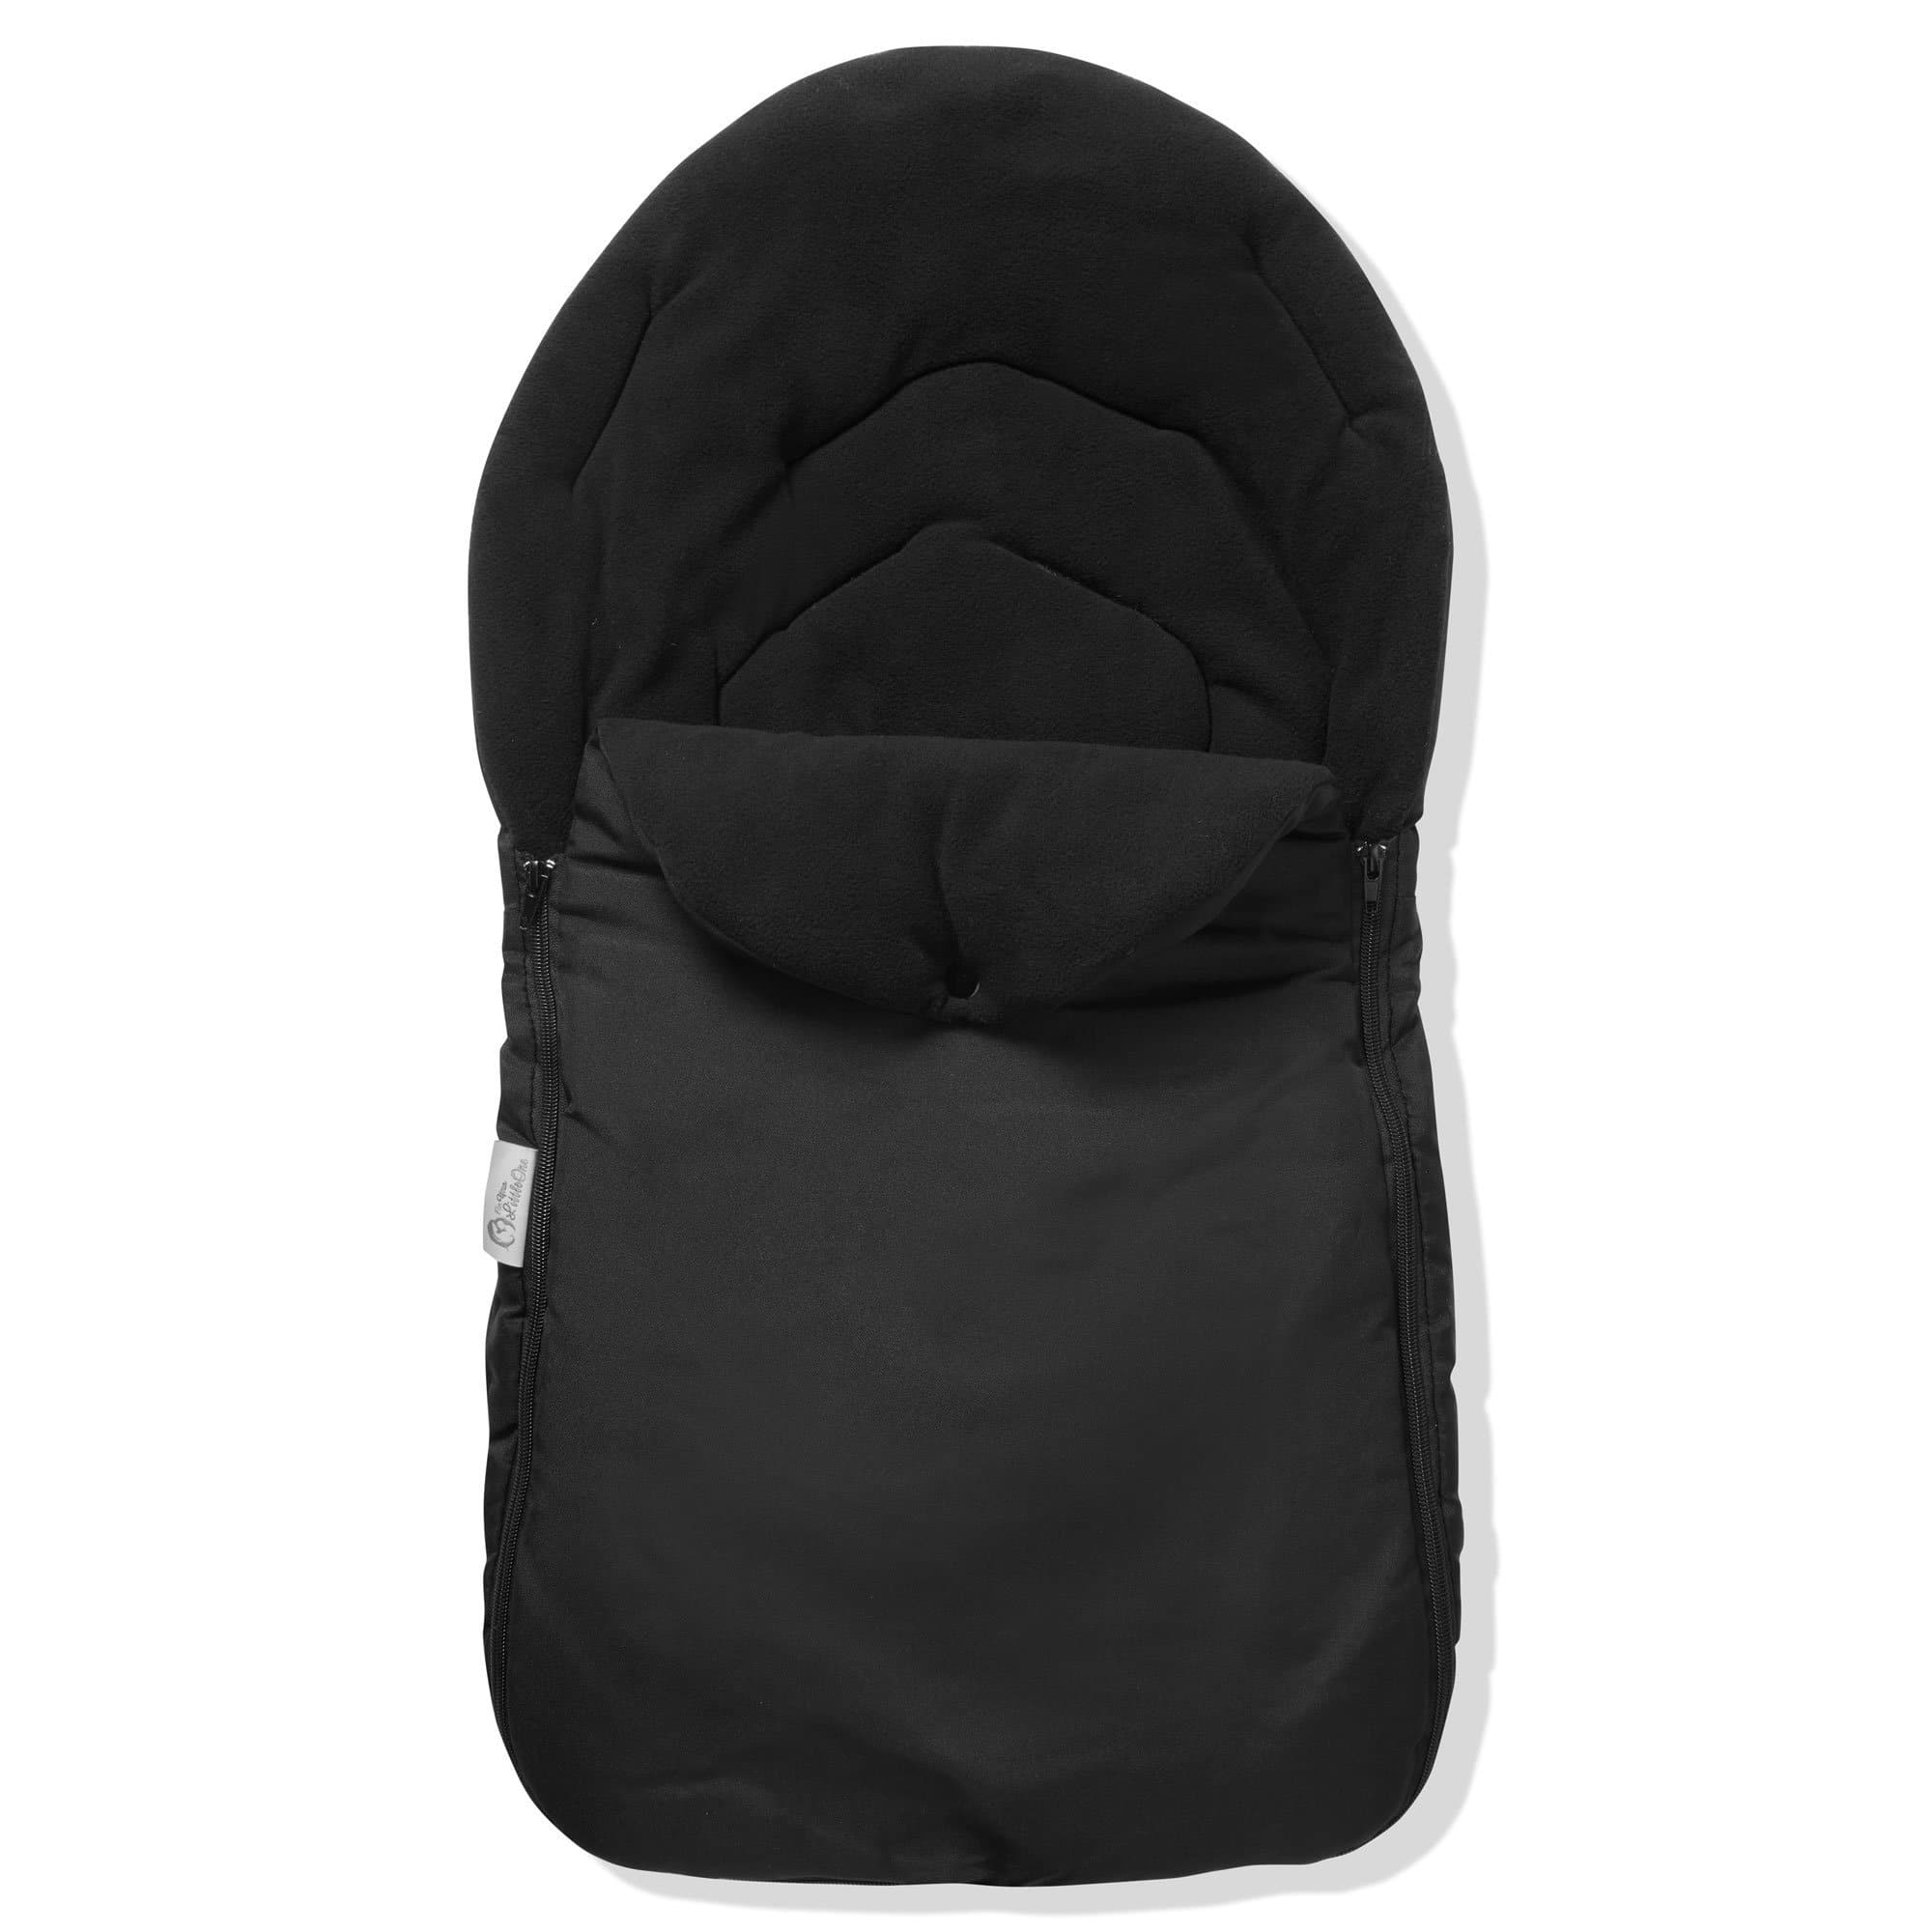 Car Seat Footmuff / Cosy Toes Compatible with Baby Jogger - Black / Fits All Models | For Your Little One